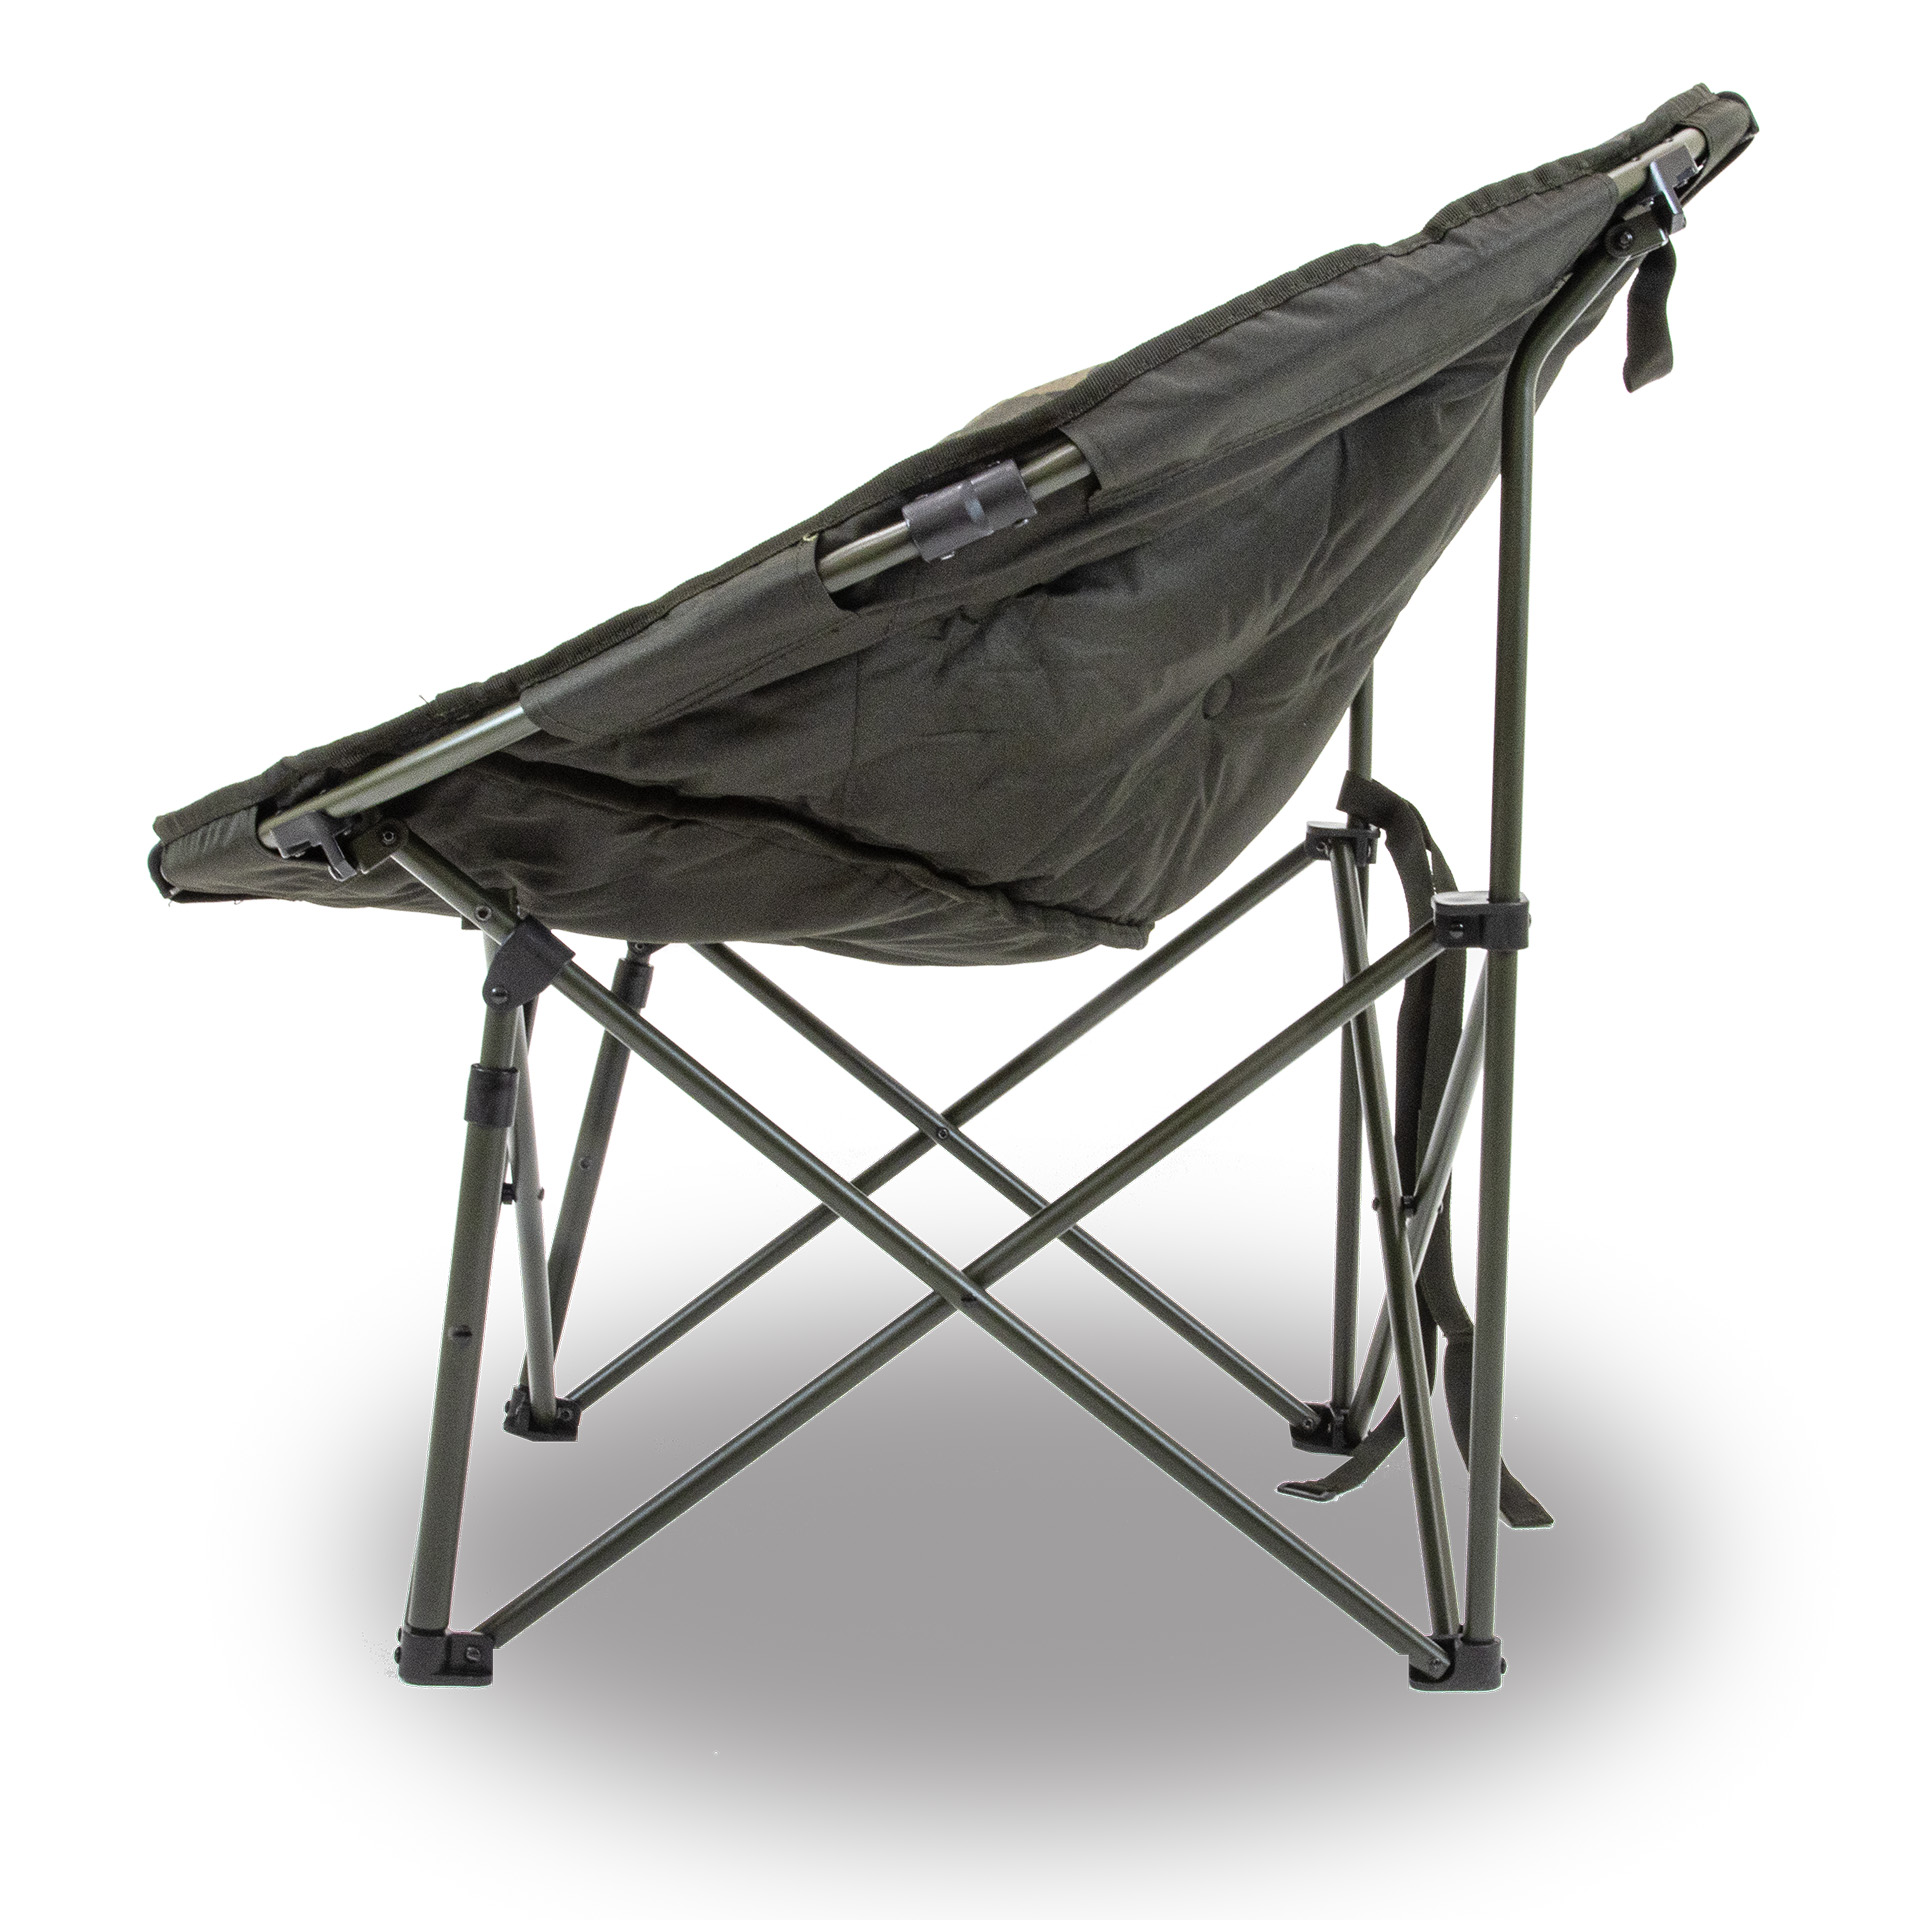 Solar South Westerly Moon Chair Karperstoel